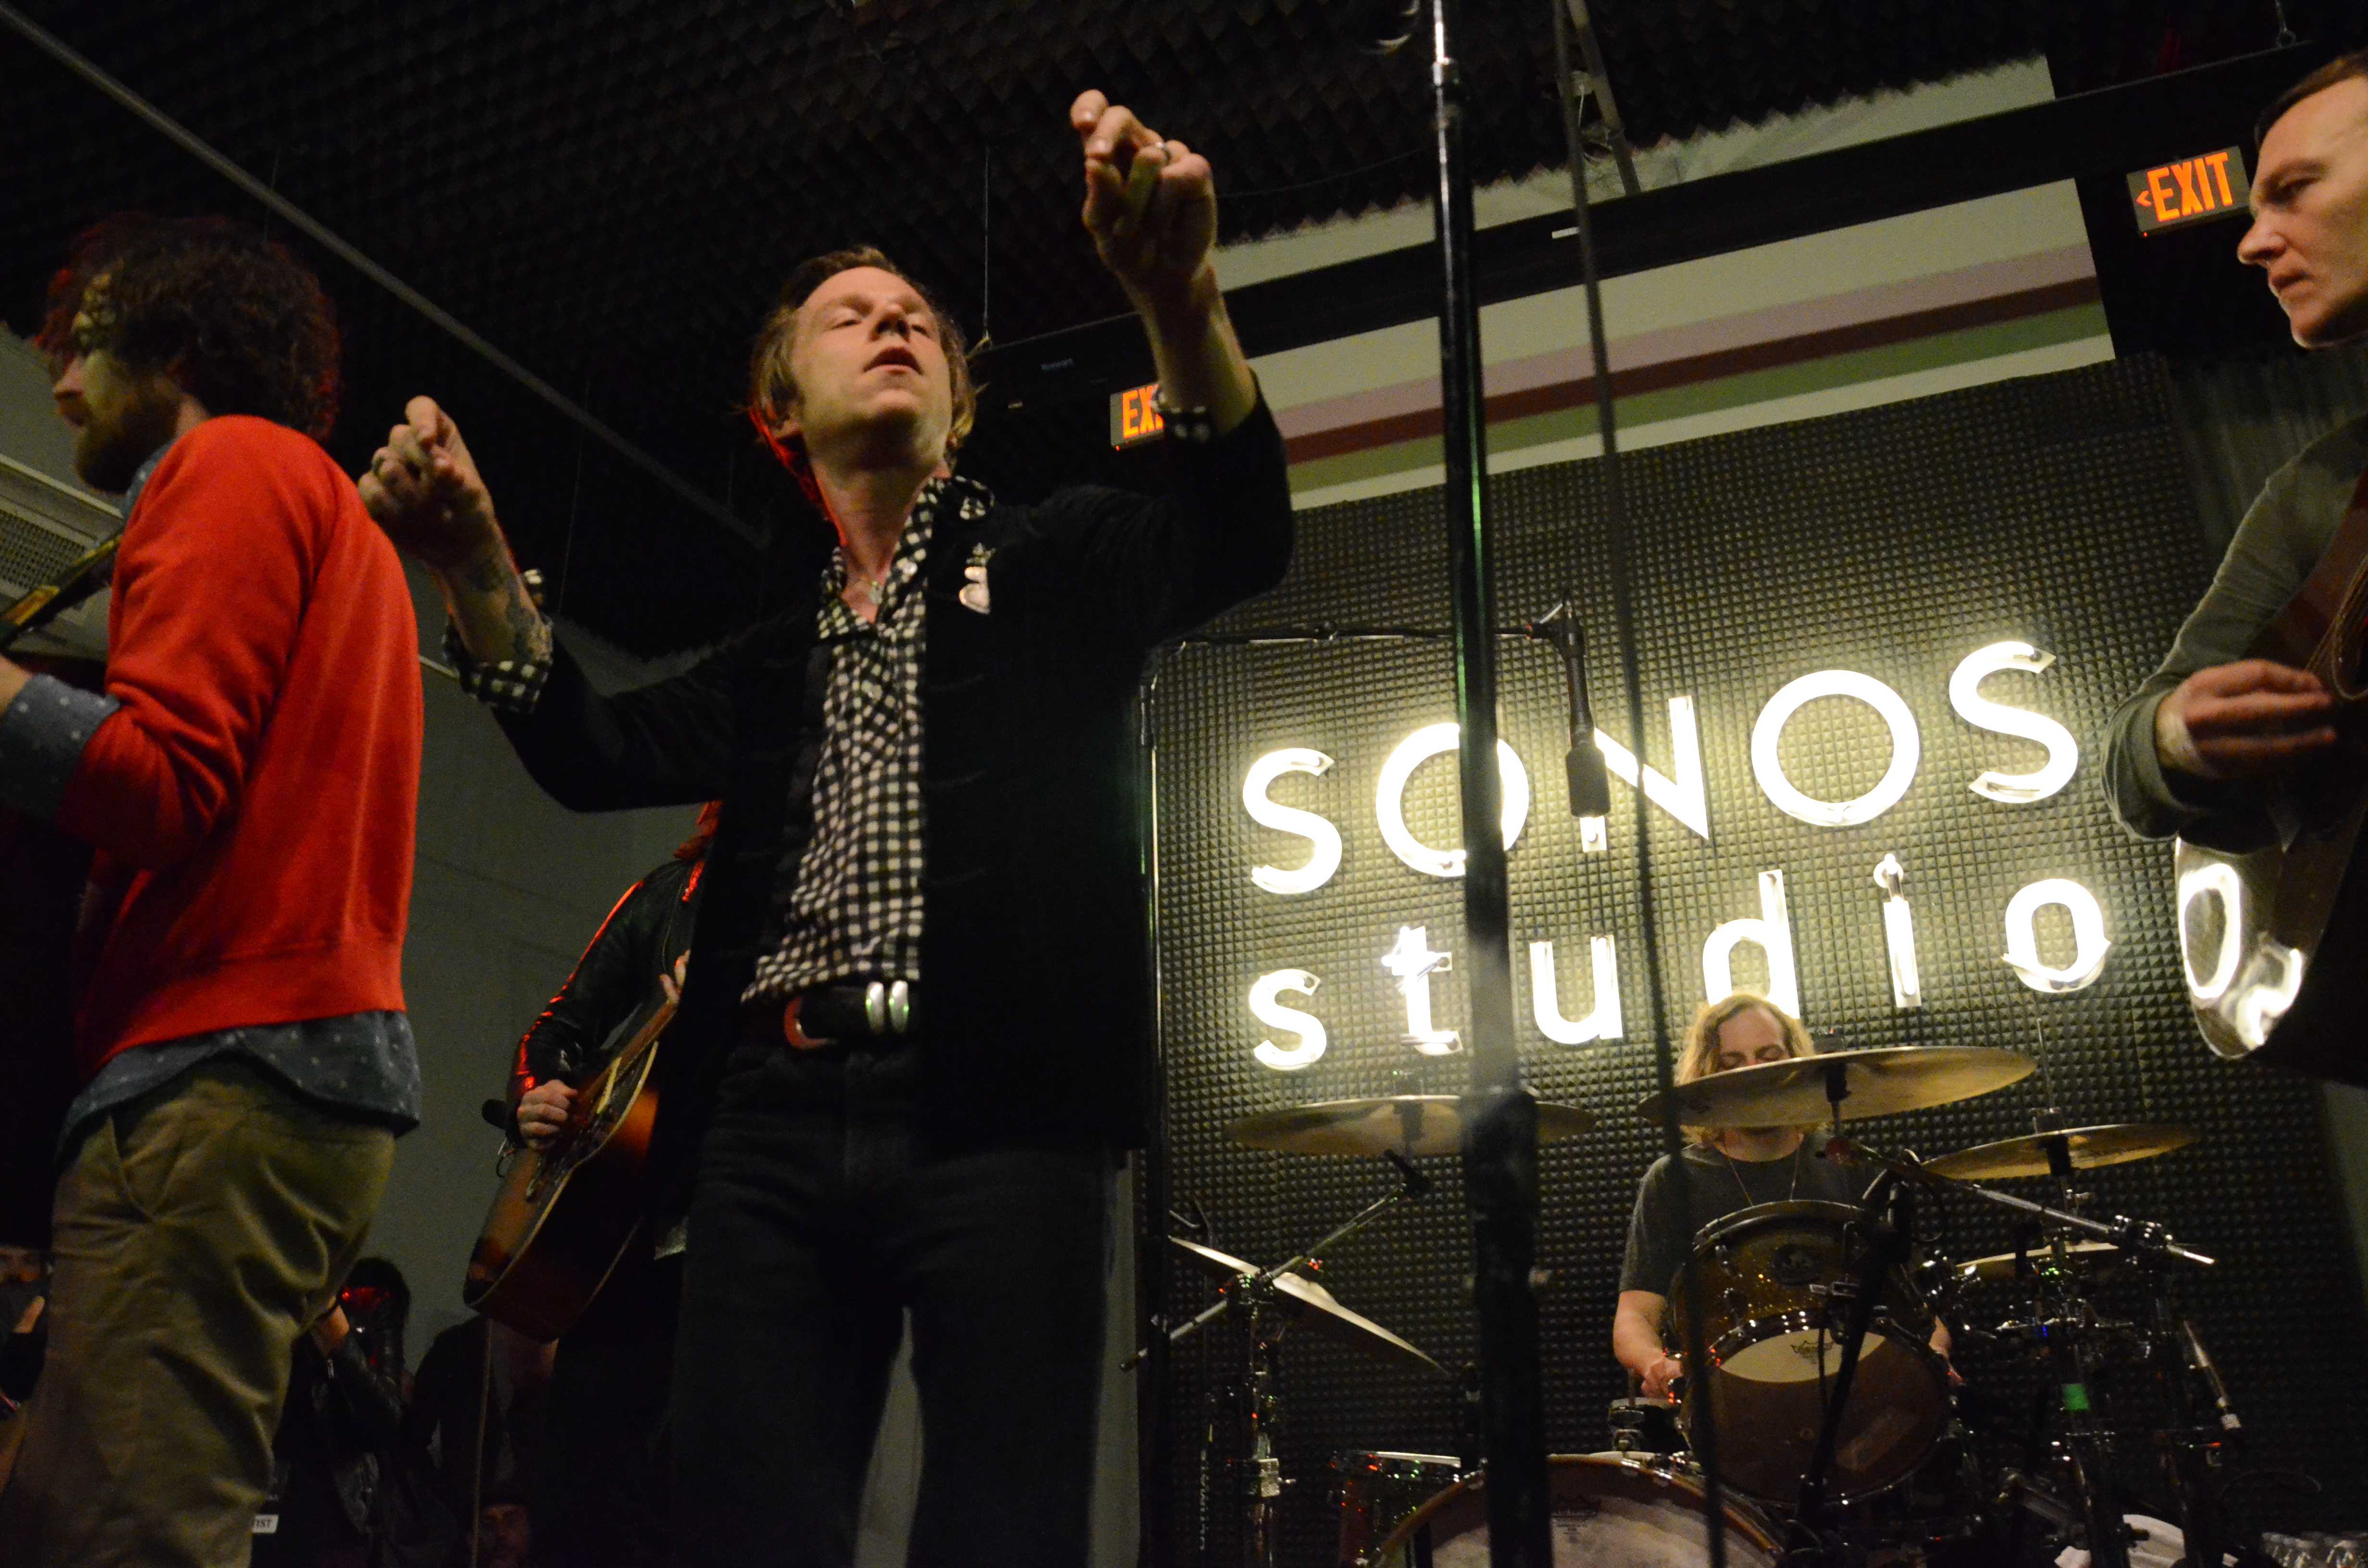 Aint No Rest For The Wicked hit-makers Cage the Elephant put on a small show at the Sonos Studios in Hollywood Tuesday night. The band performed radio hits and tracks off their Grammy-nominated album Melophobia. Photo credit: Vincent Nguyen